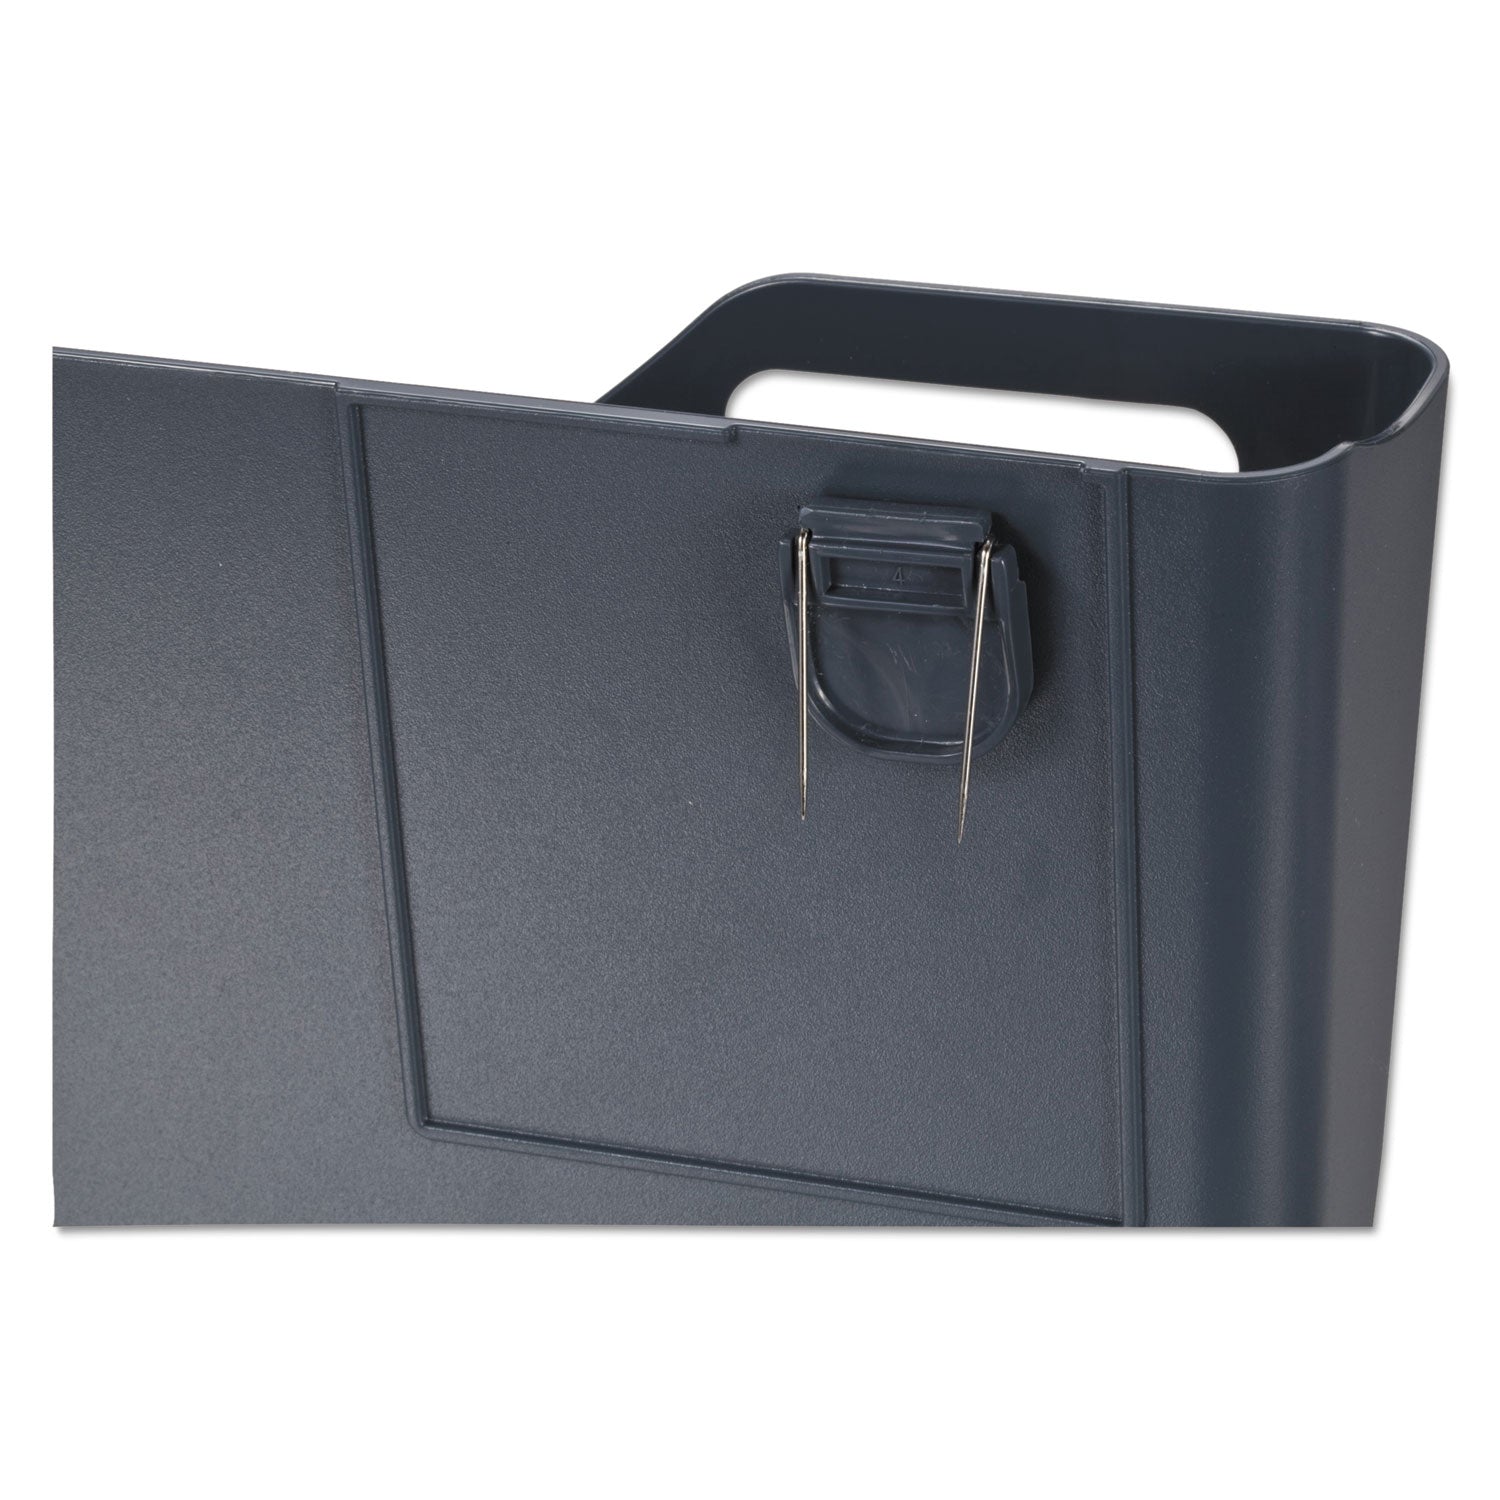 Recycled Plastic Cubicle Single File Pocket, Cubicle Pins Mount, 13.5 x 3 x 7, Charcoal - 